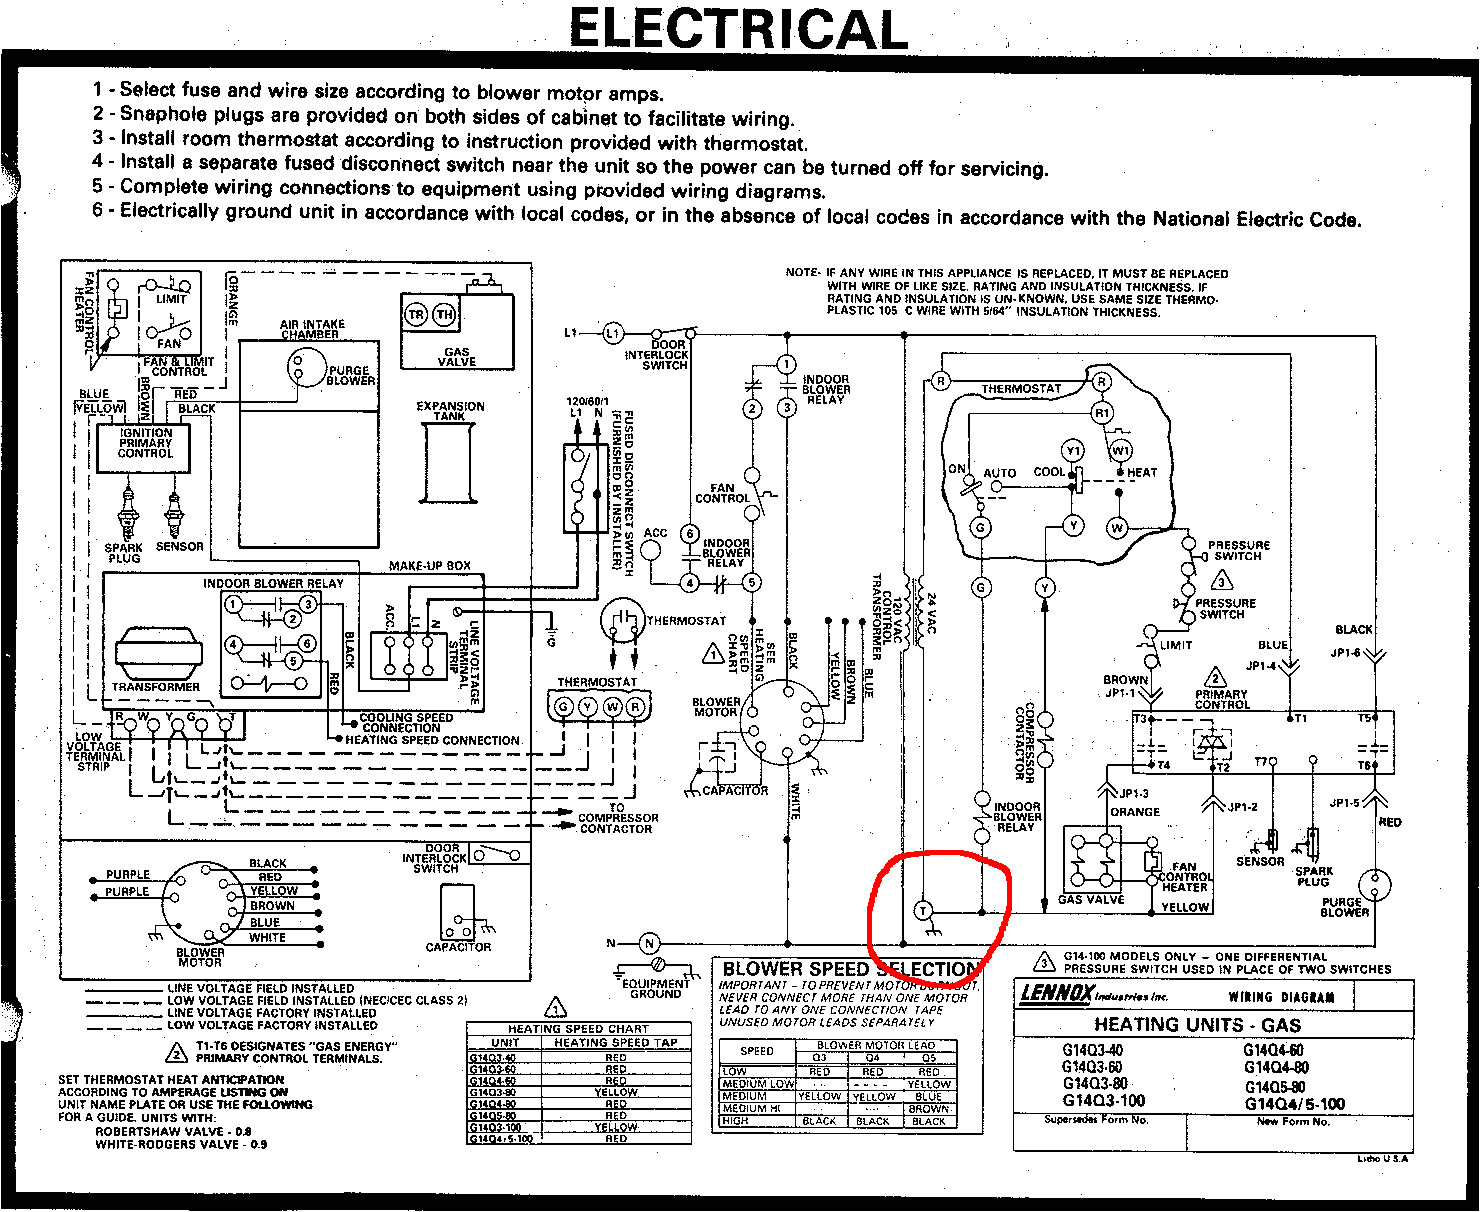 carrier heating thermostat wiring diagram free download wiring diagramcarrier heating thermostat wiring diagram free download